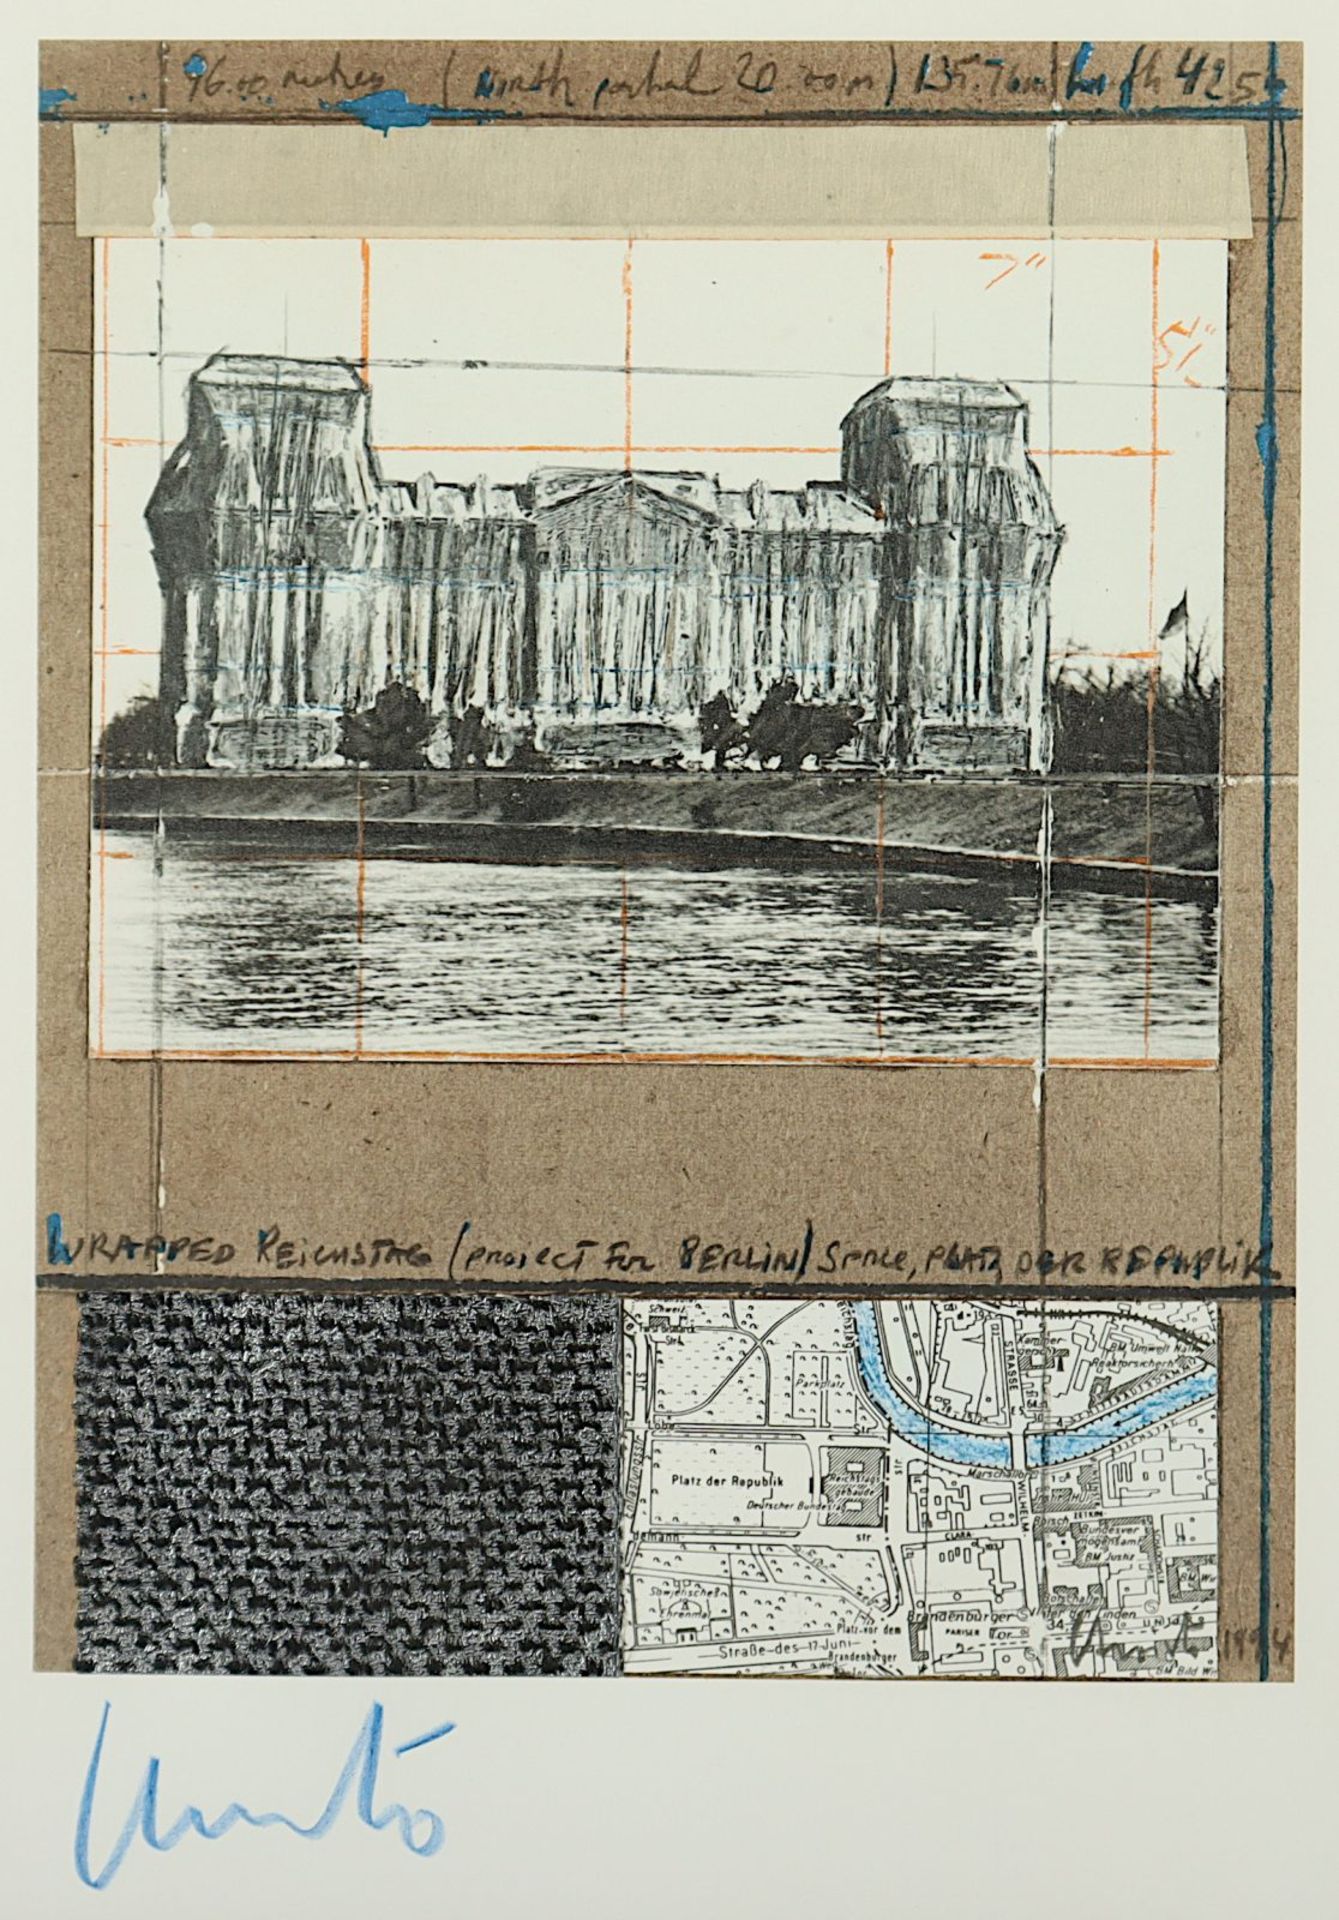 Christo, "Wrapped Reichstag", R.